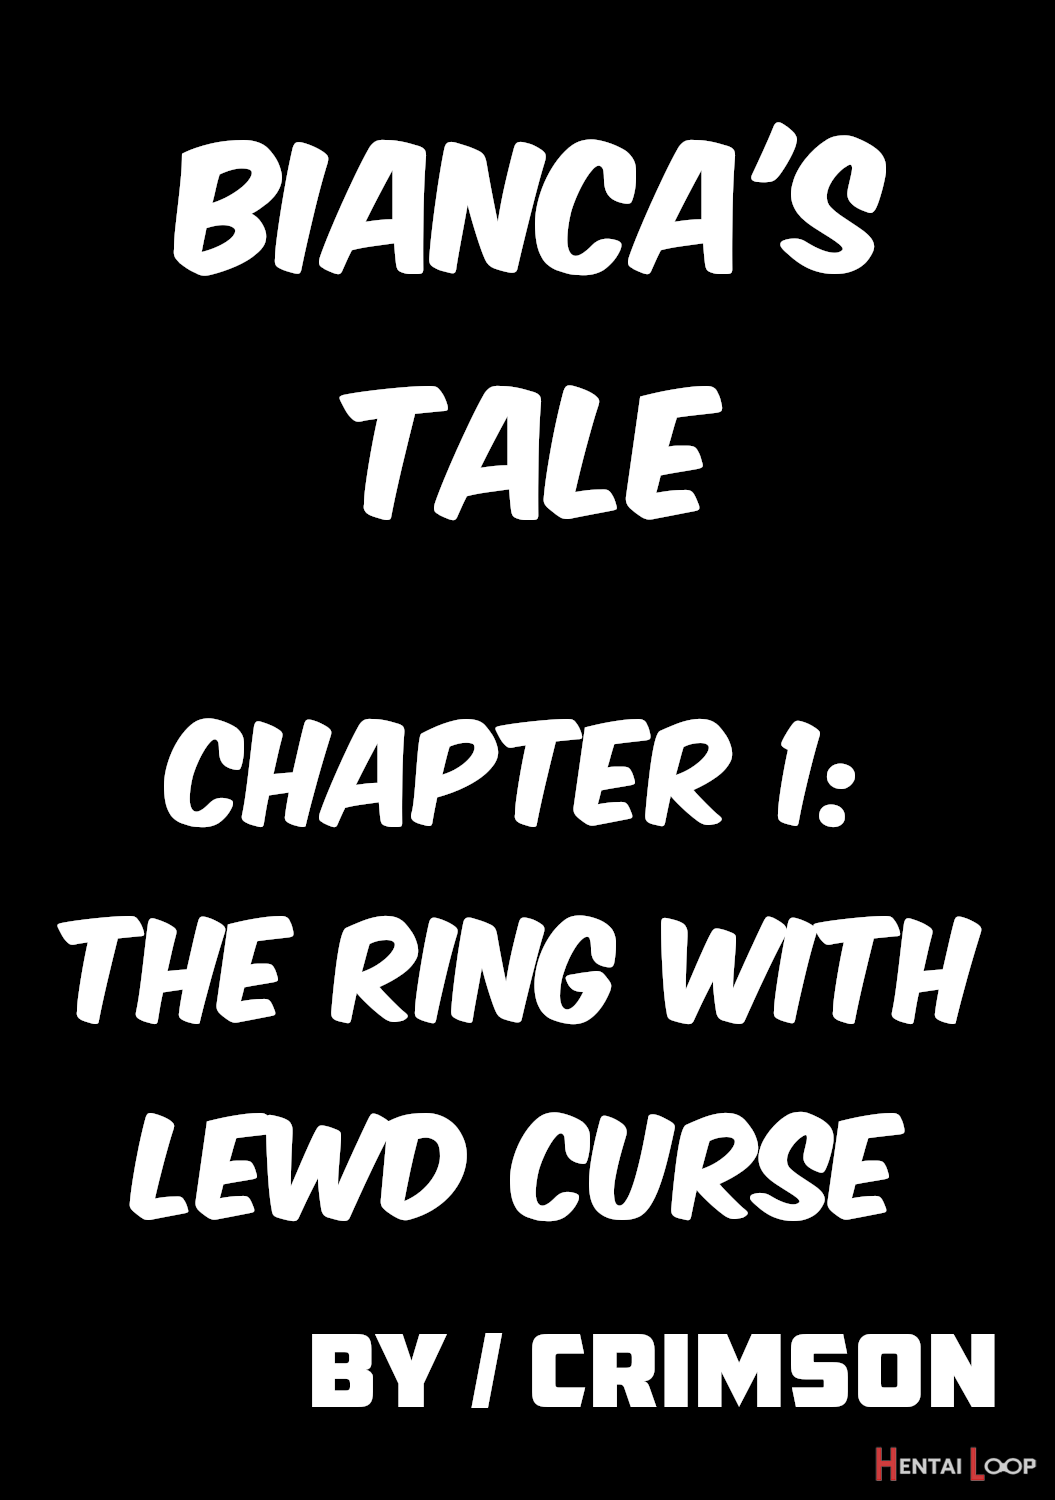 Bianca's Tale page 7